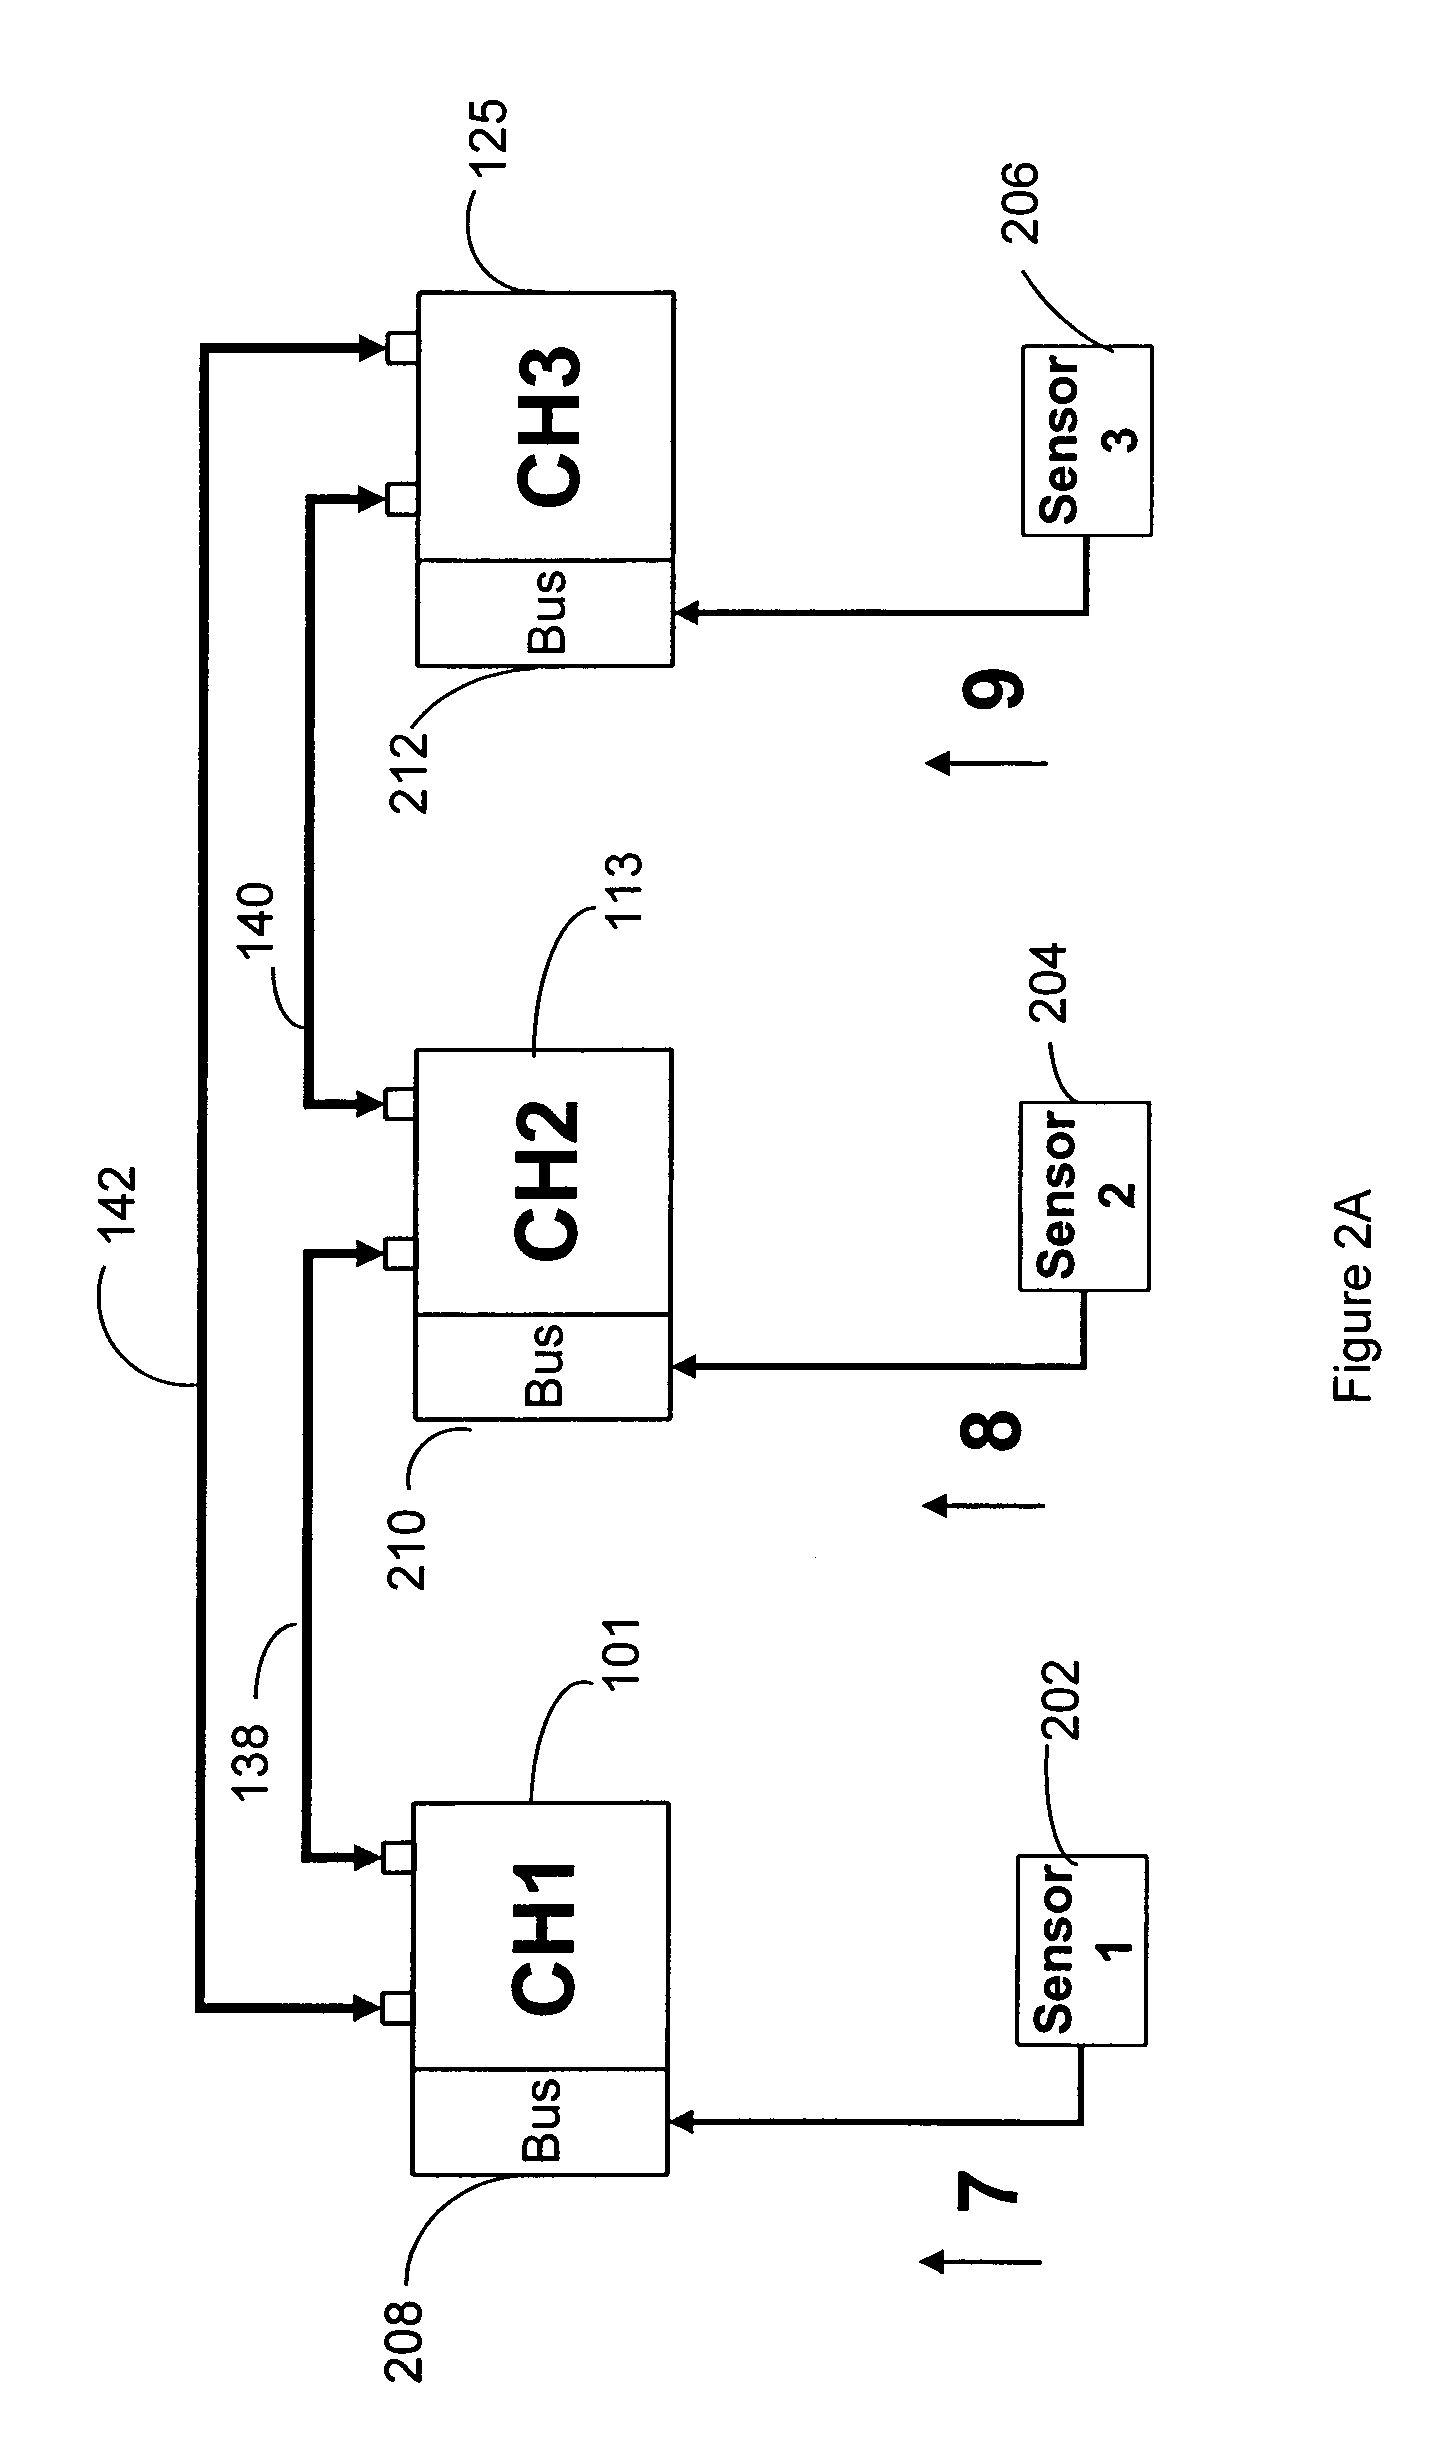 Systems and methods for redundancy management in fault tolerant computing